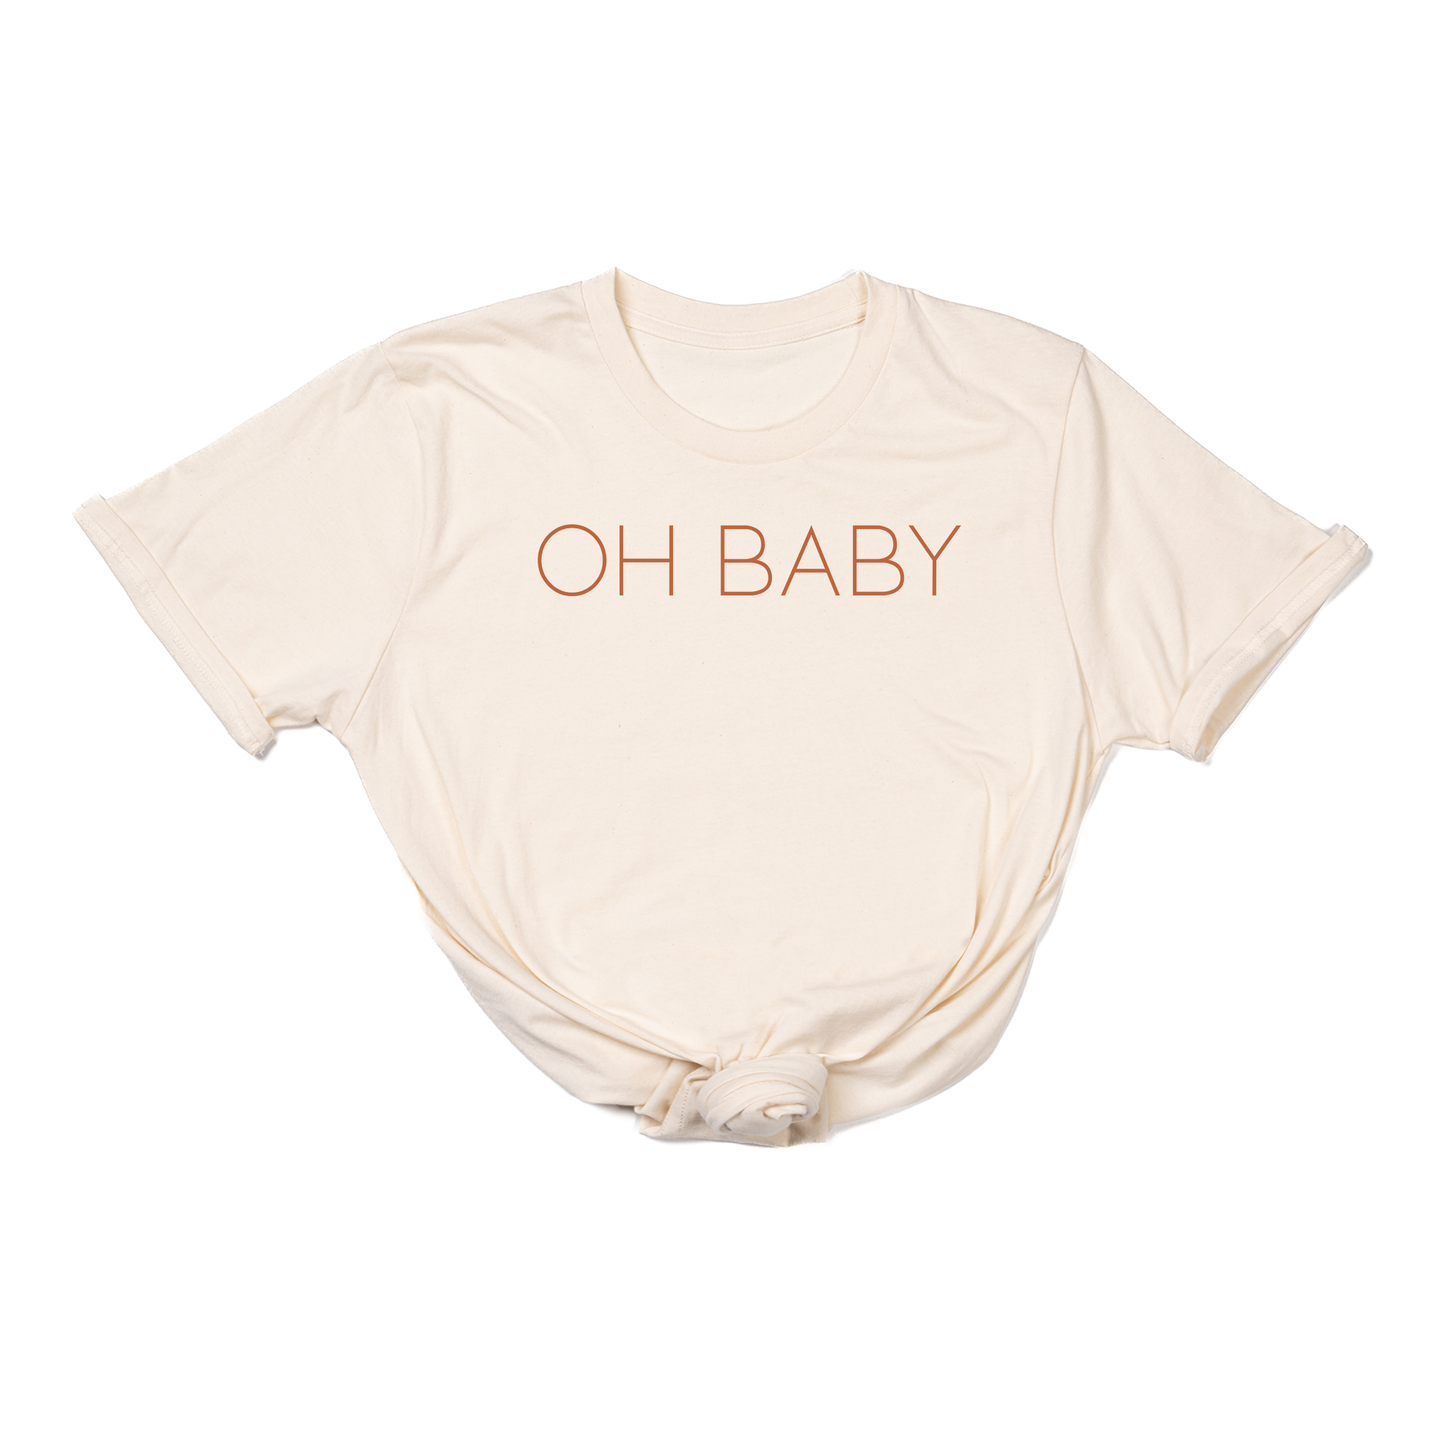 OH BABY (Rust) - Tee (Natural)